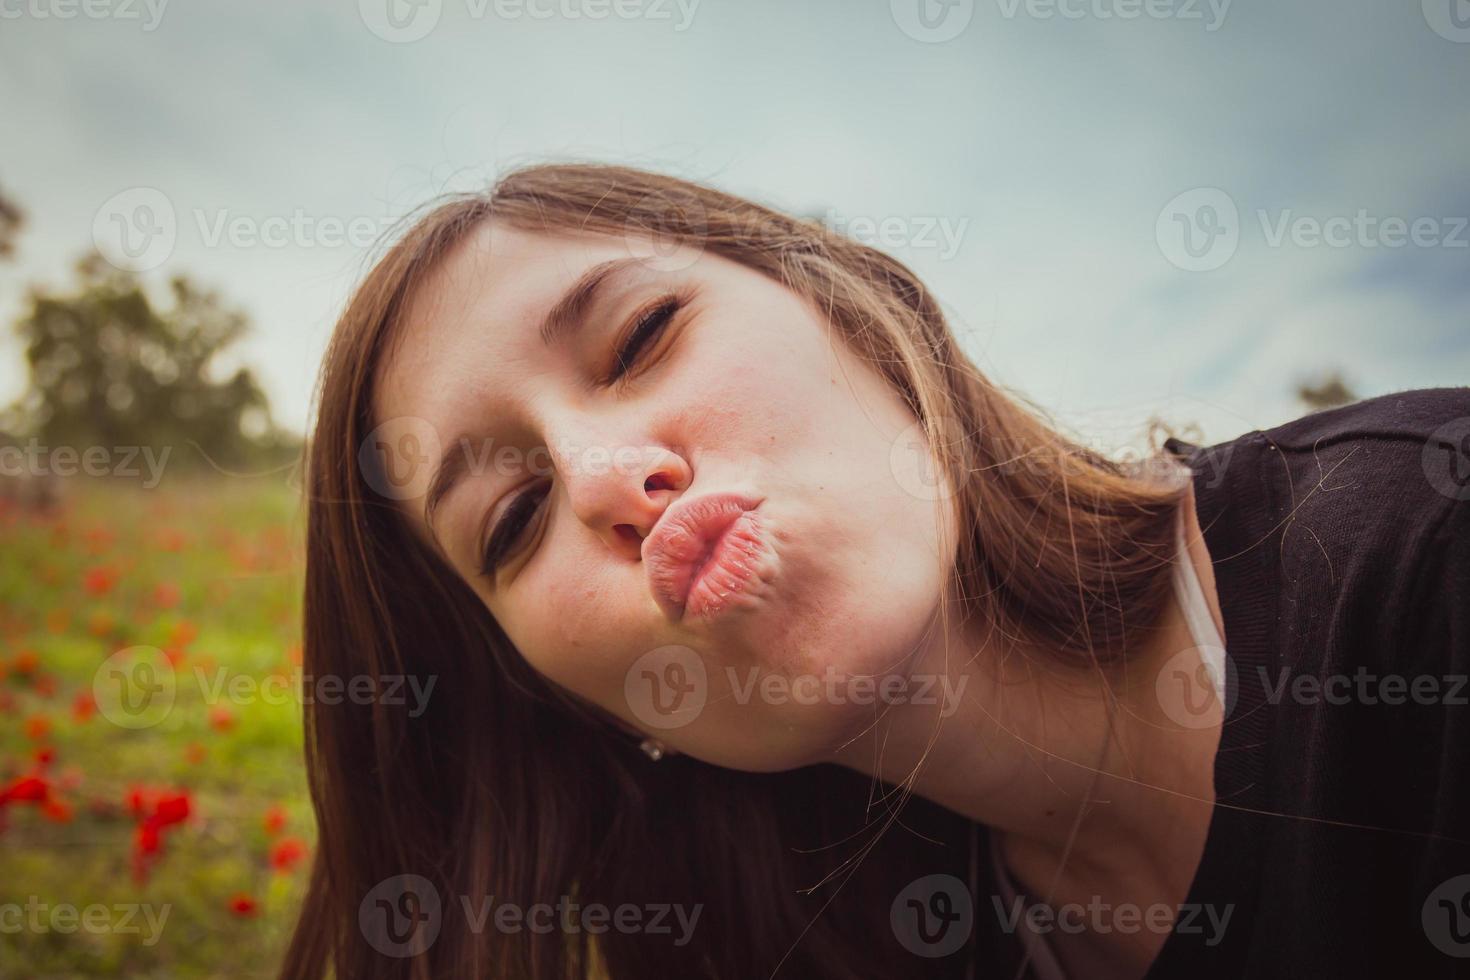 Young woman making duckface kiss while taking selfie picture with her smartphone or camera in field of red poppies photo